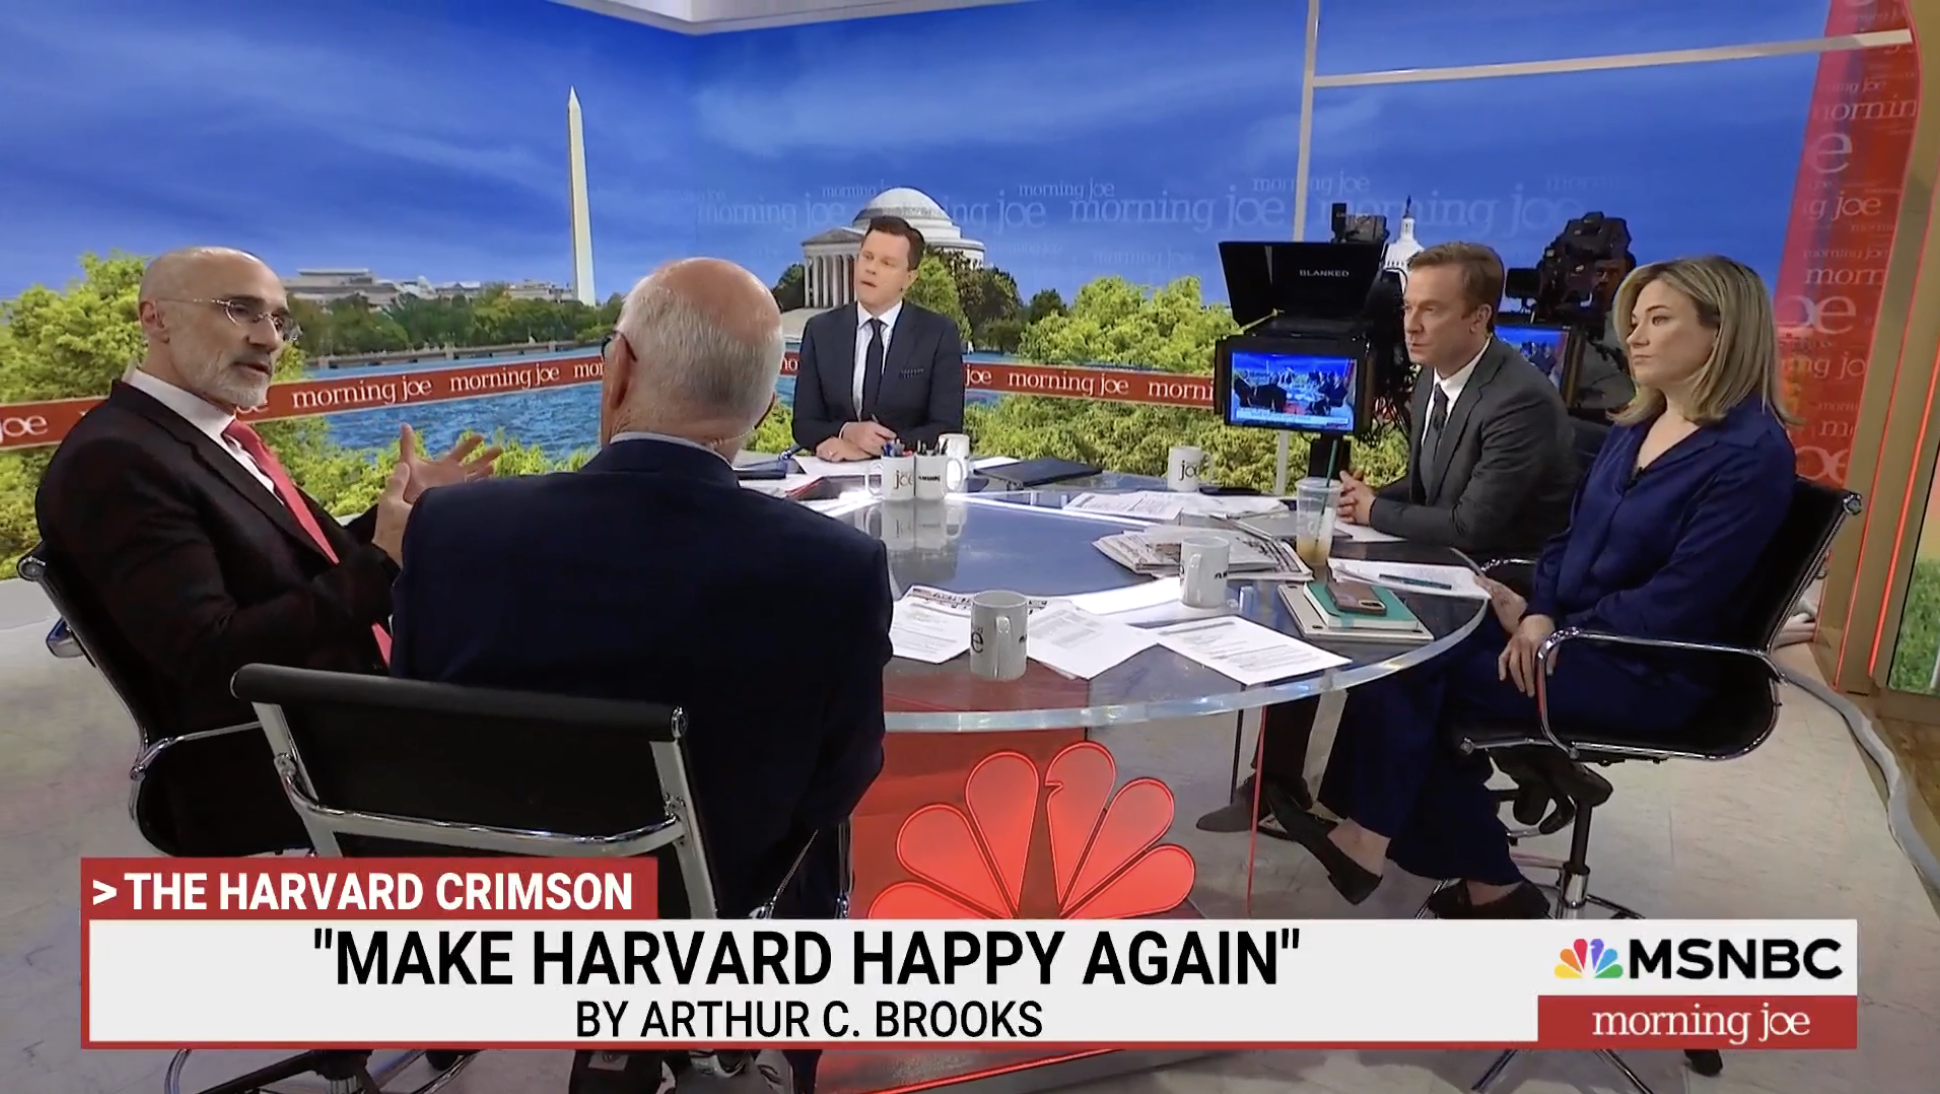 Morning Joe: Want to make America happy again? Start loving people who disagree with us